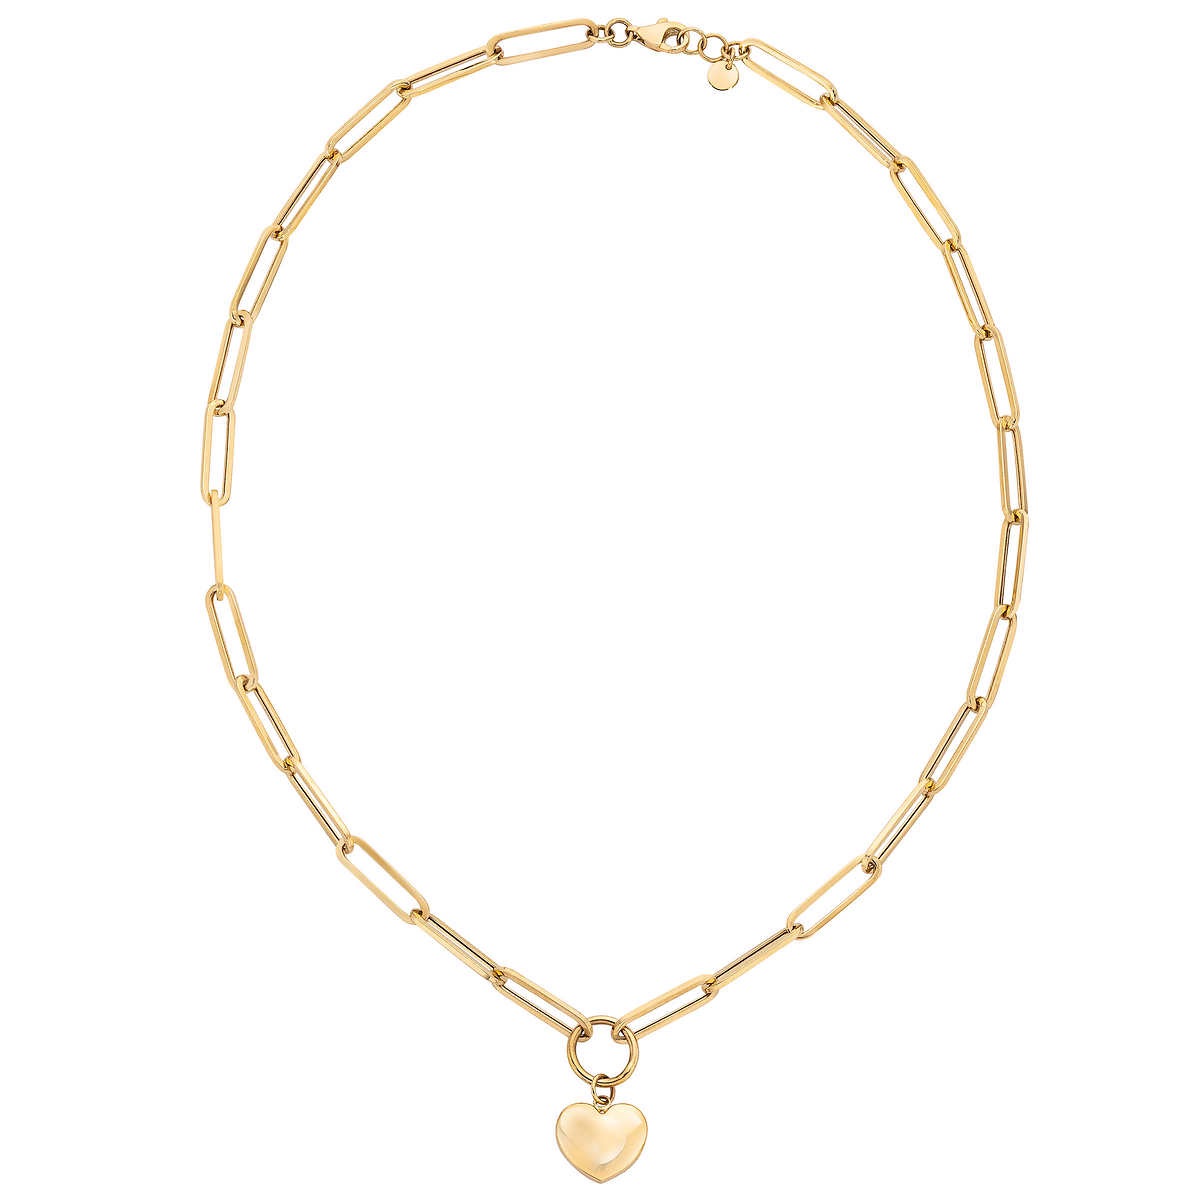 14kt Yellow Gold Paperclip Necklace with Heart Charm | Costco项链